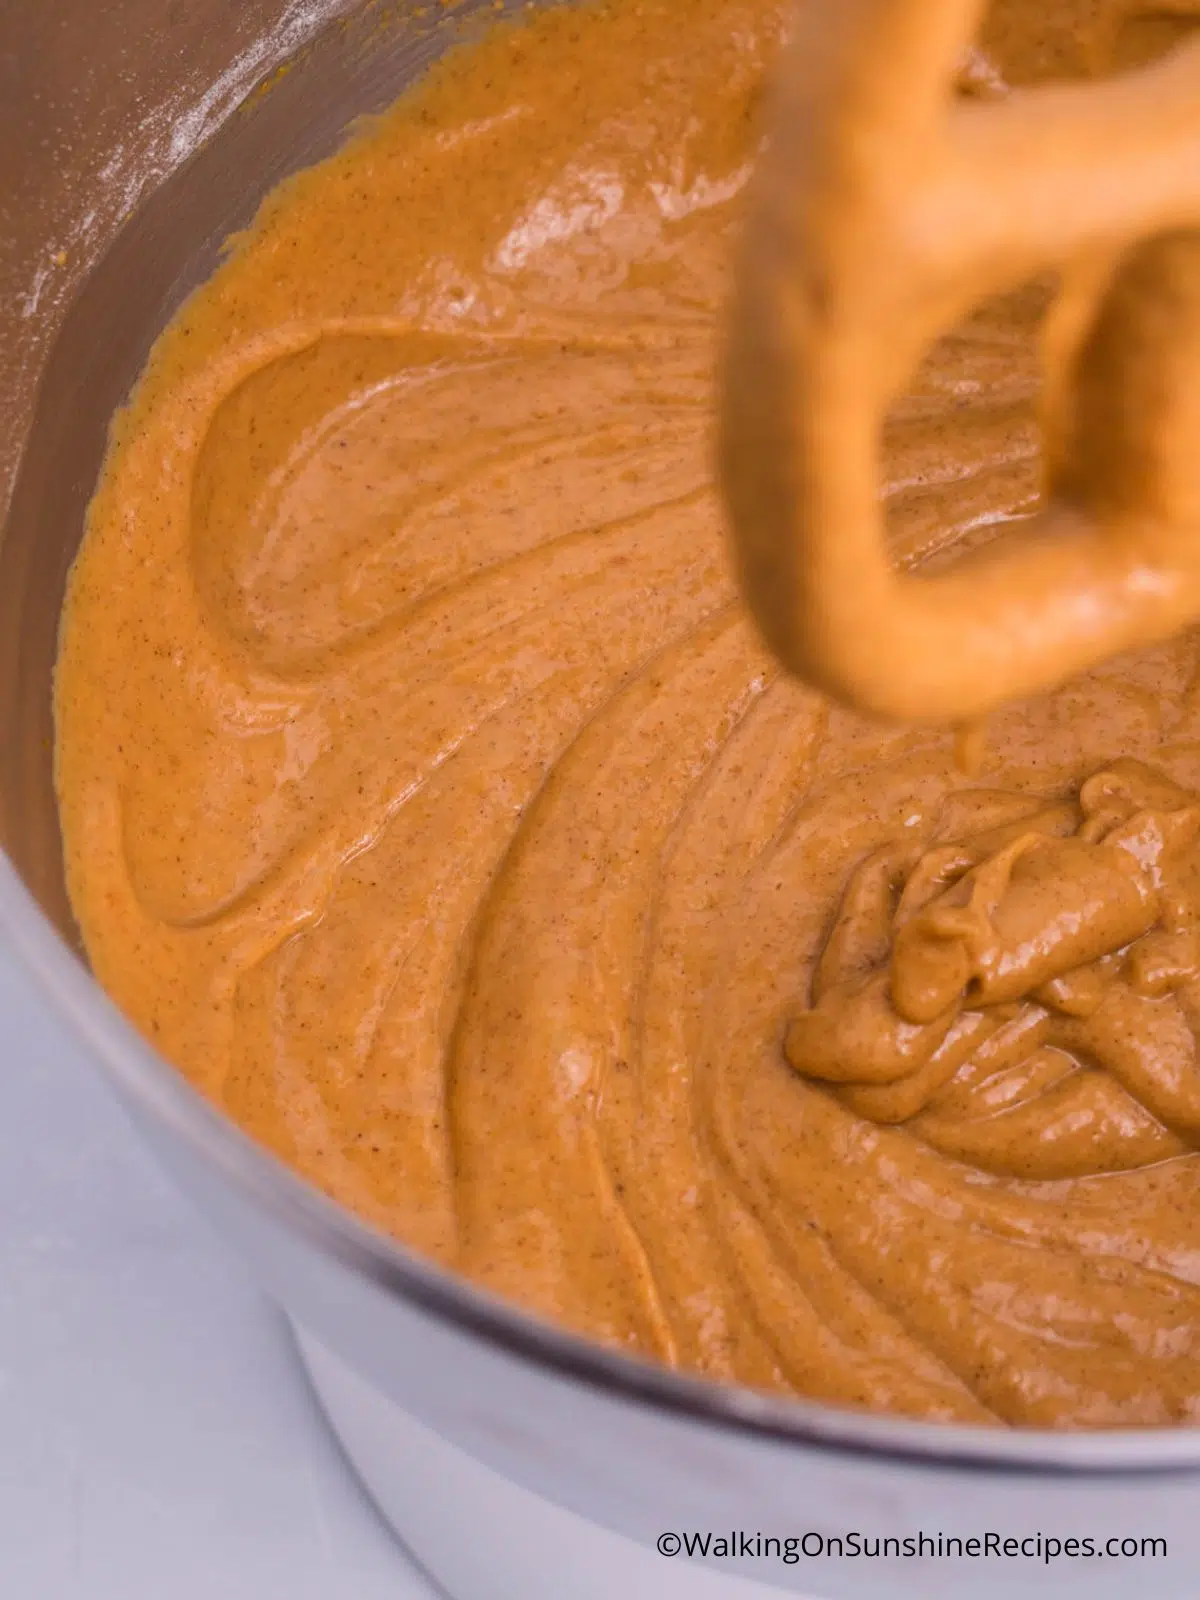 spice cake mix combined with pumpkin puree.